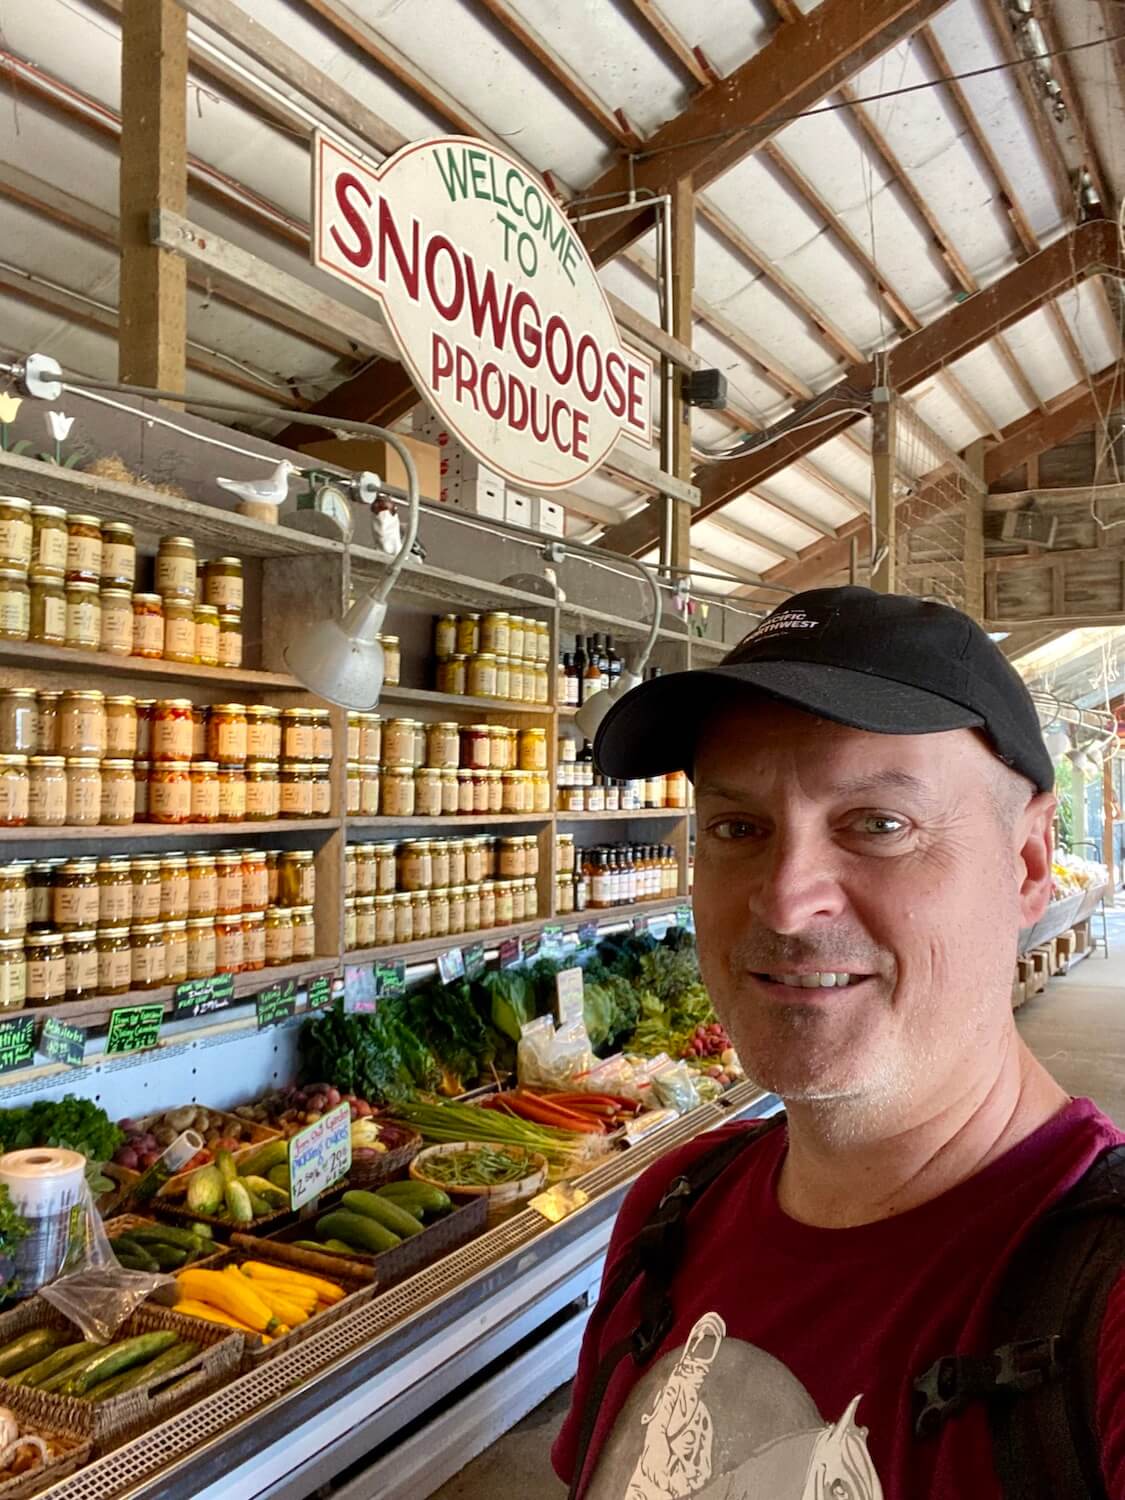 Matthew Kessi poses for this selfie at Snow Goose Produce in the Skagit Valley. He's wearing a magenta t-shirt and black cap and there are shelves of farm products on the wall behind him, as well as vegetables in a cooler below.